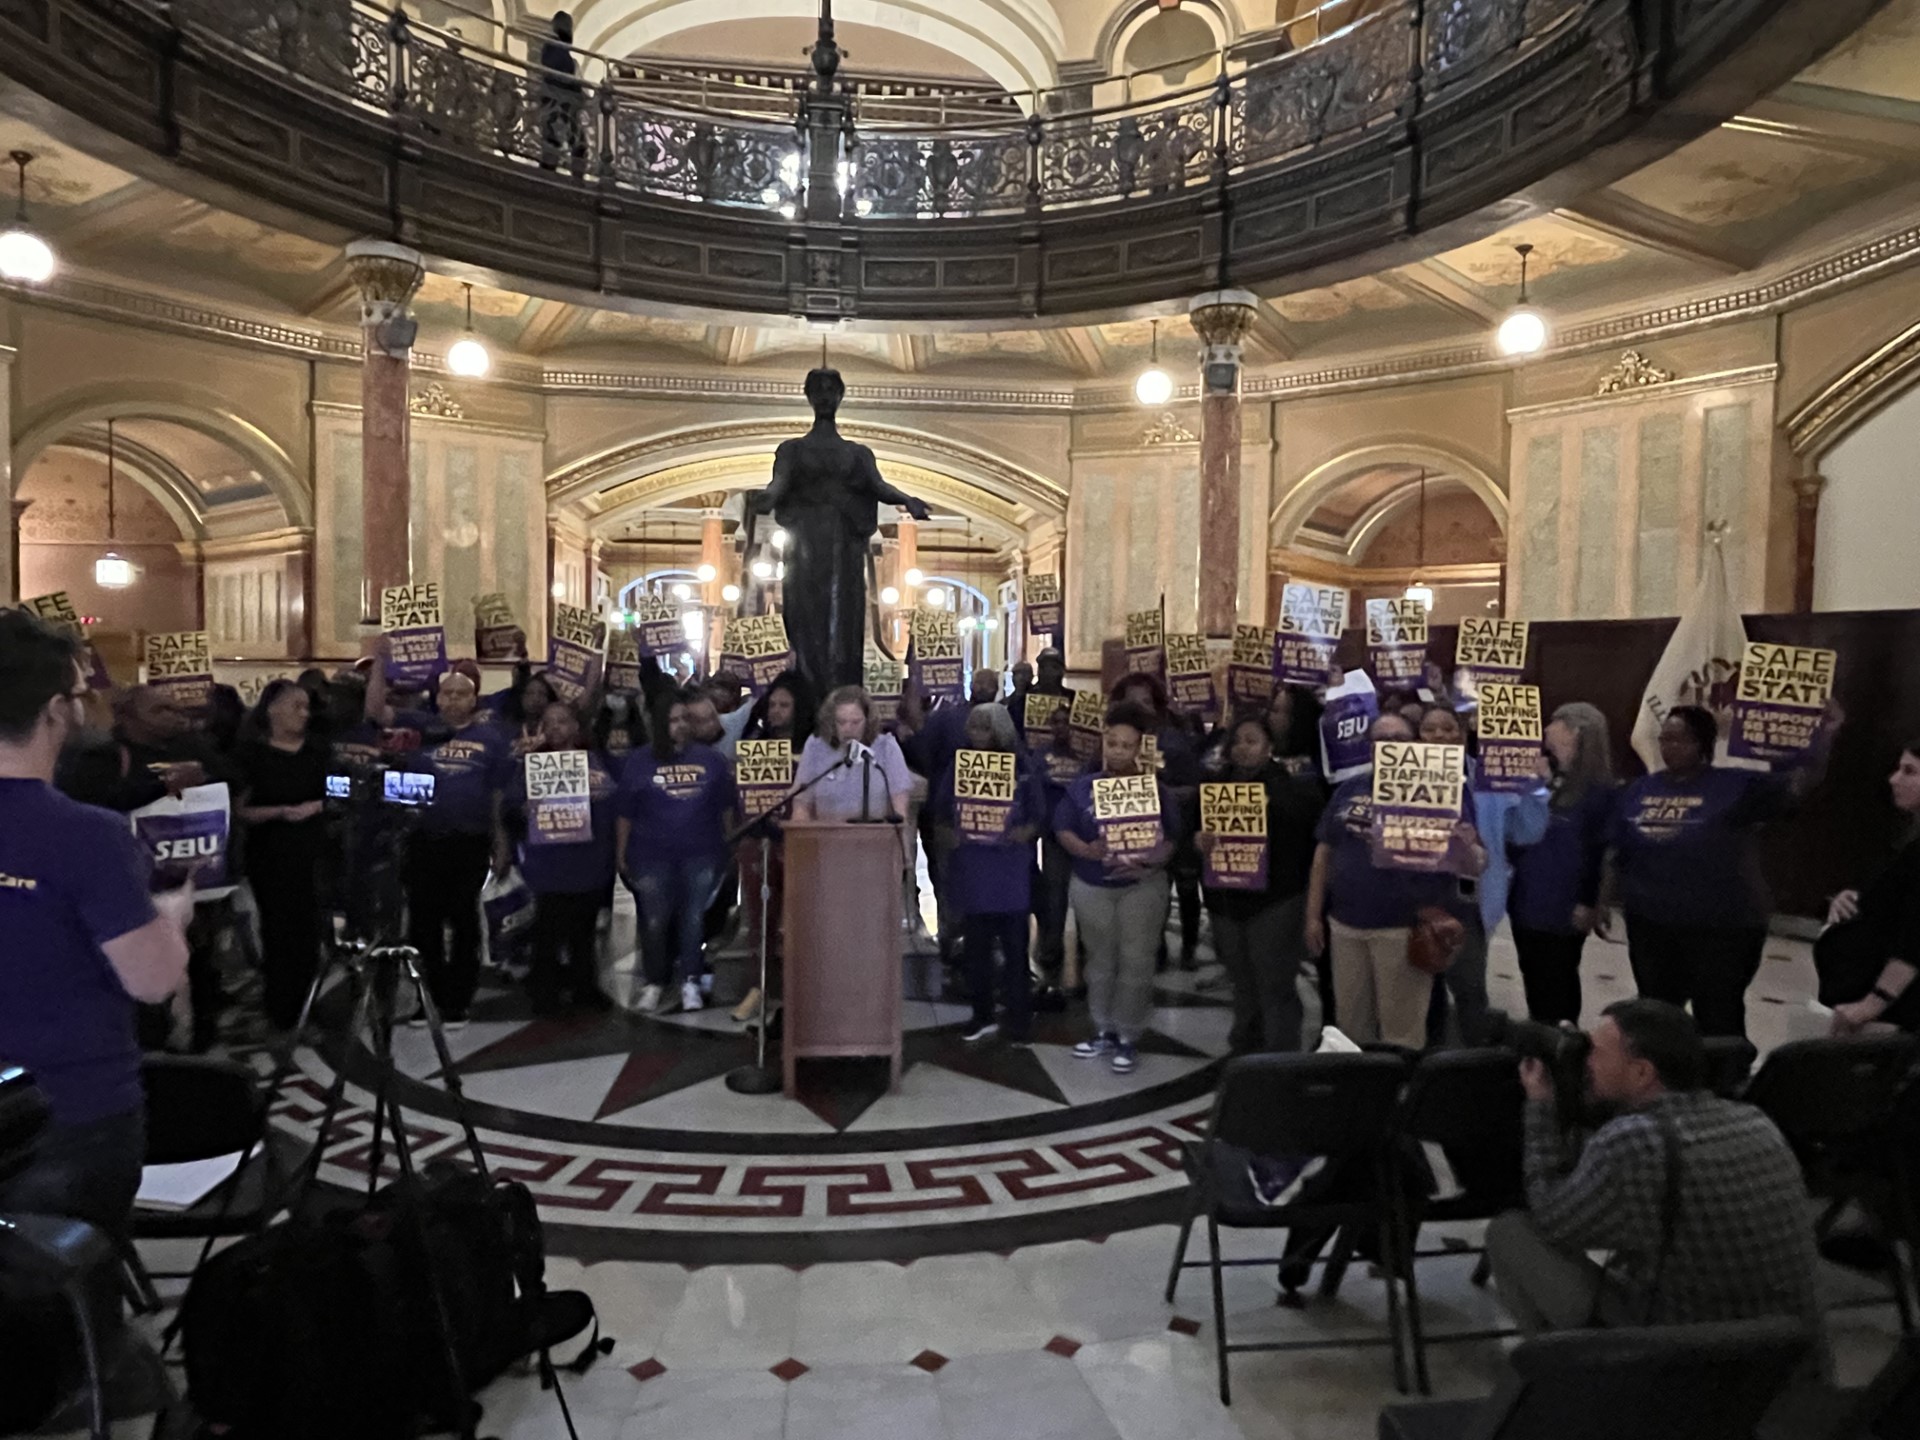 Health care workers rally at state capitol for safe staffing issues